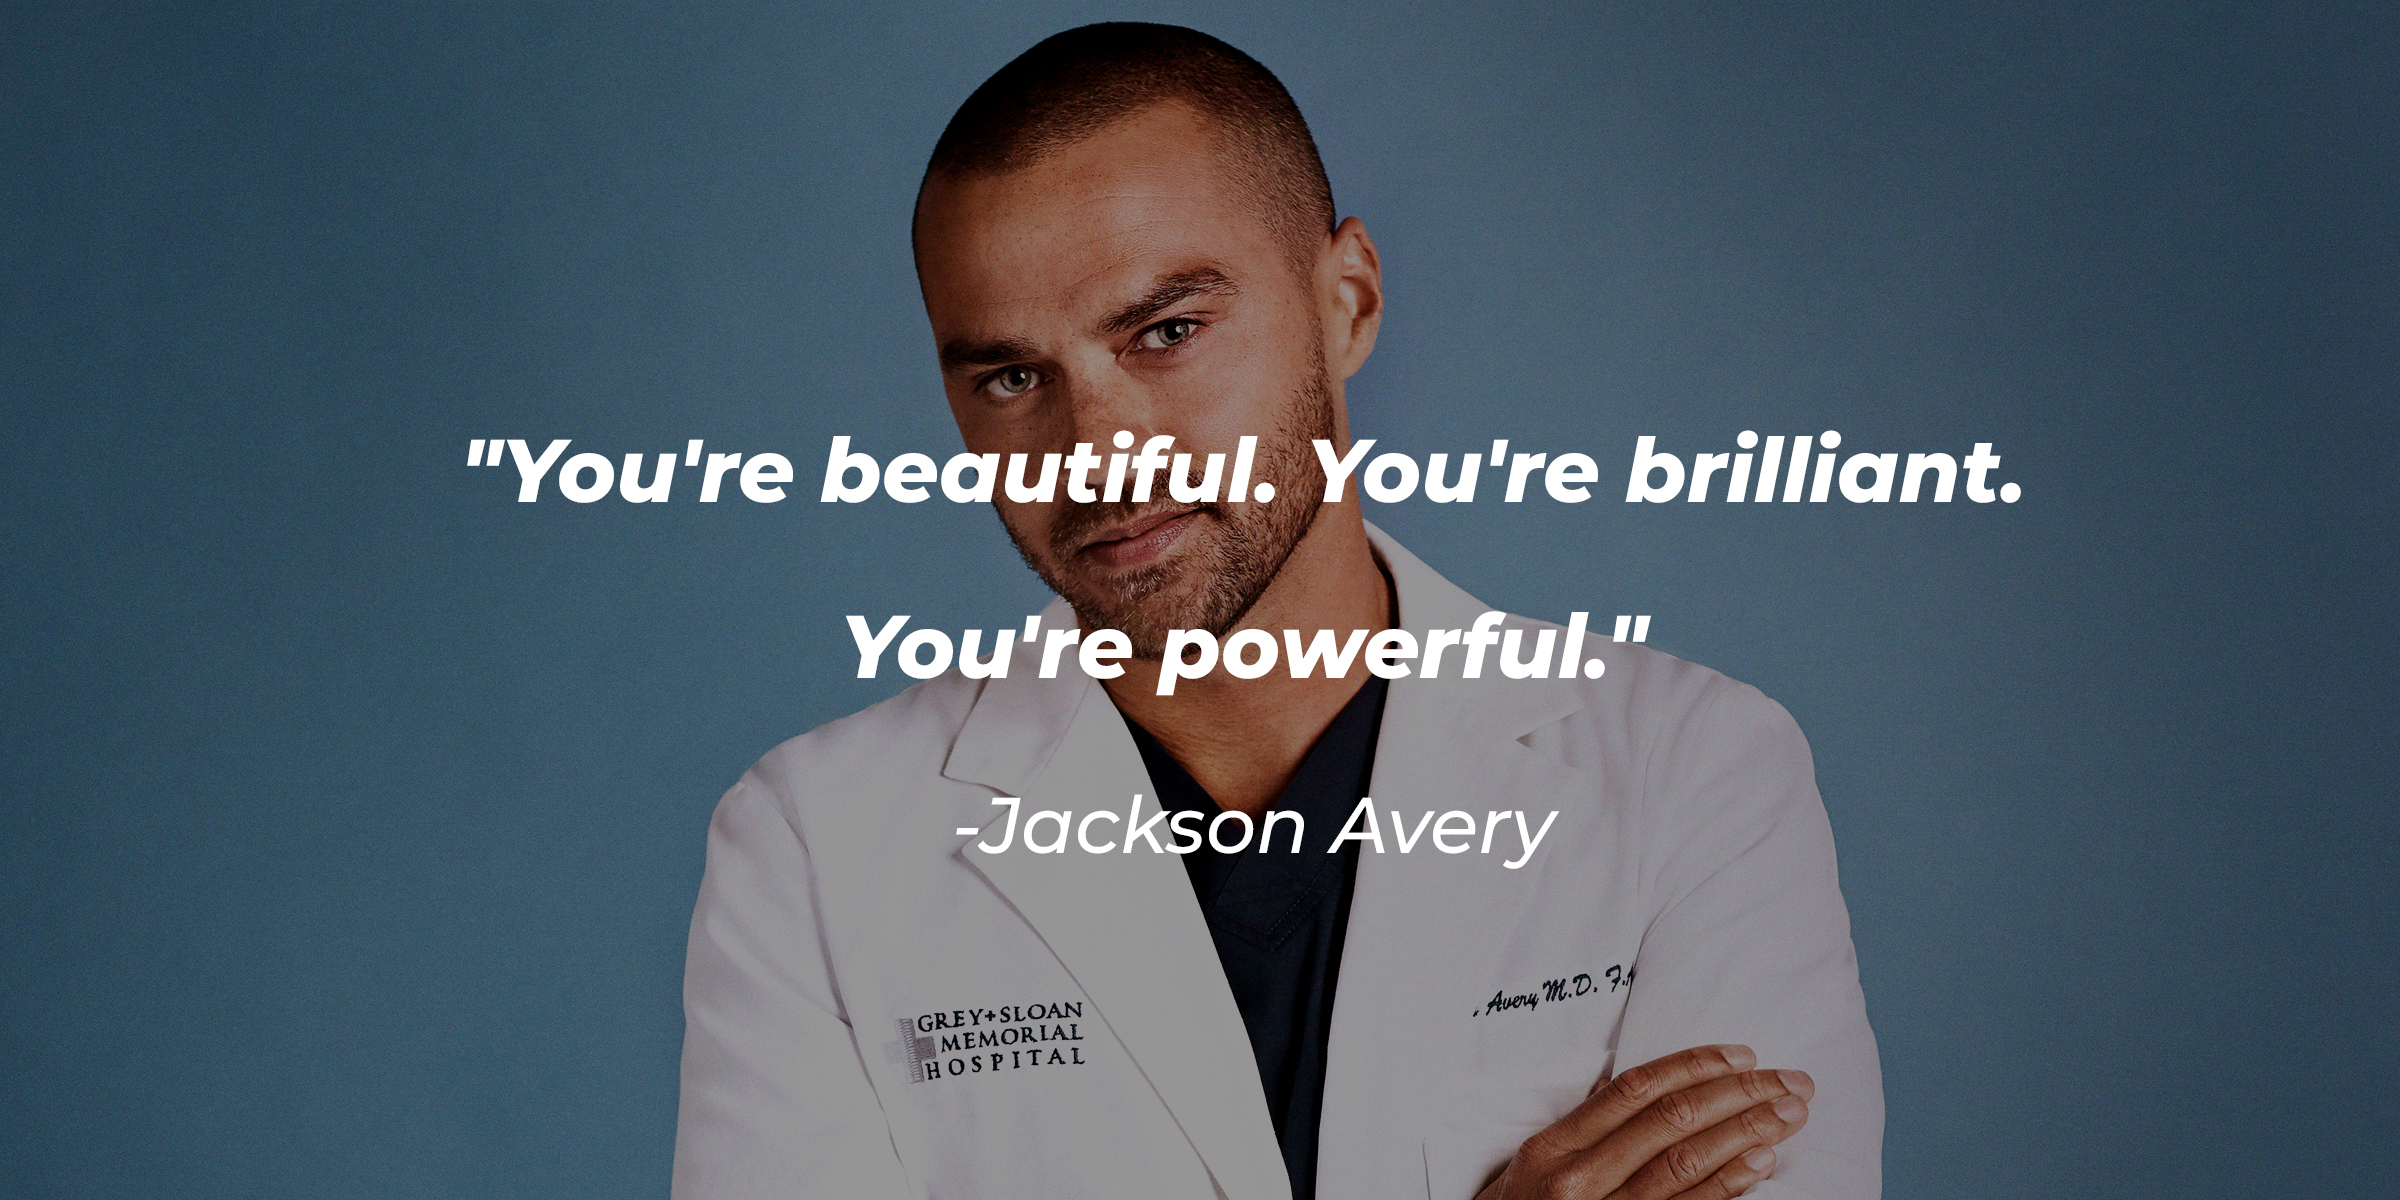 Jackson Avery, with his quote: "You're beautiful. You're brilliant. You're powerful." | Source: Getty Images